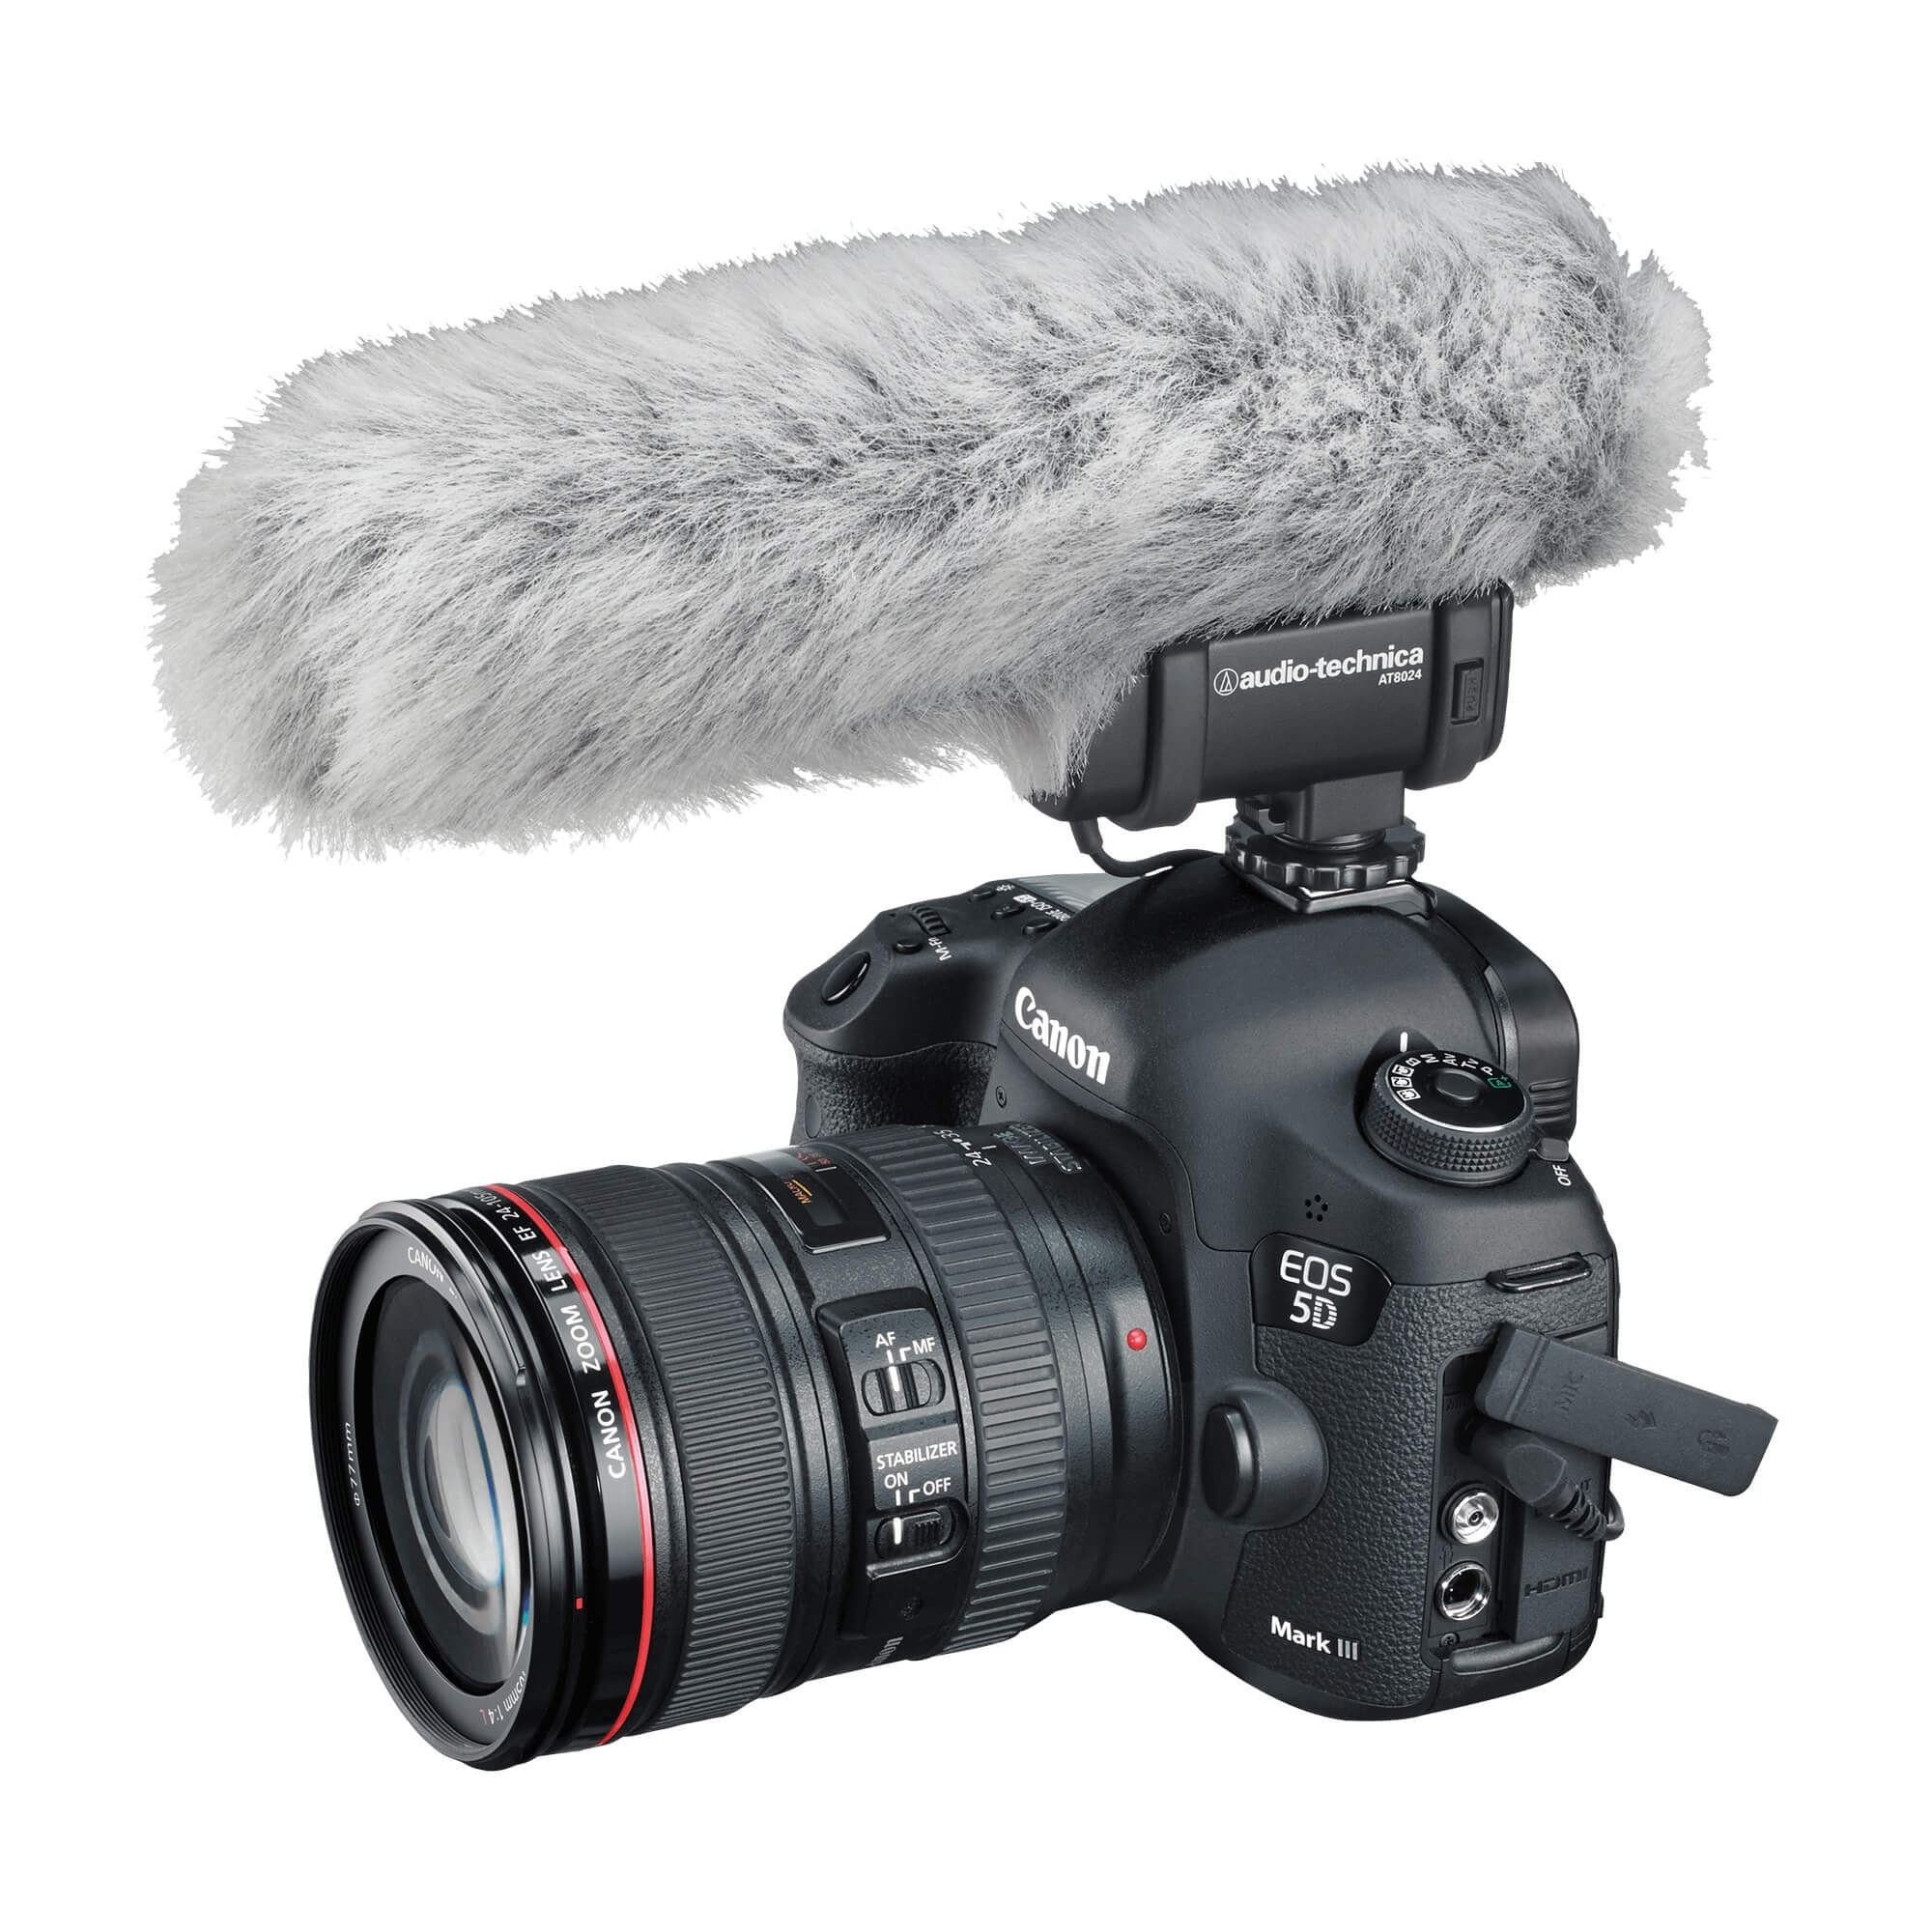 Audio-Technica AT8024 - Stereo/Mono Camera-Mount Microphone, mounted on a DSLR camera with included fuzzy windscreen